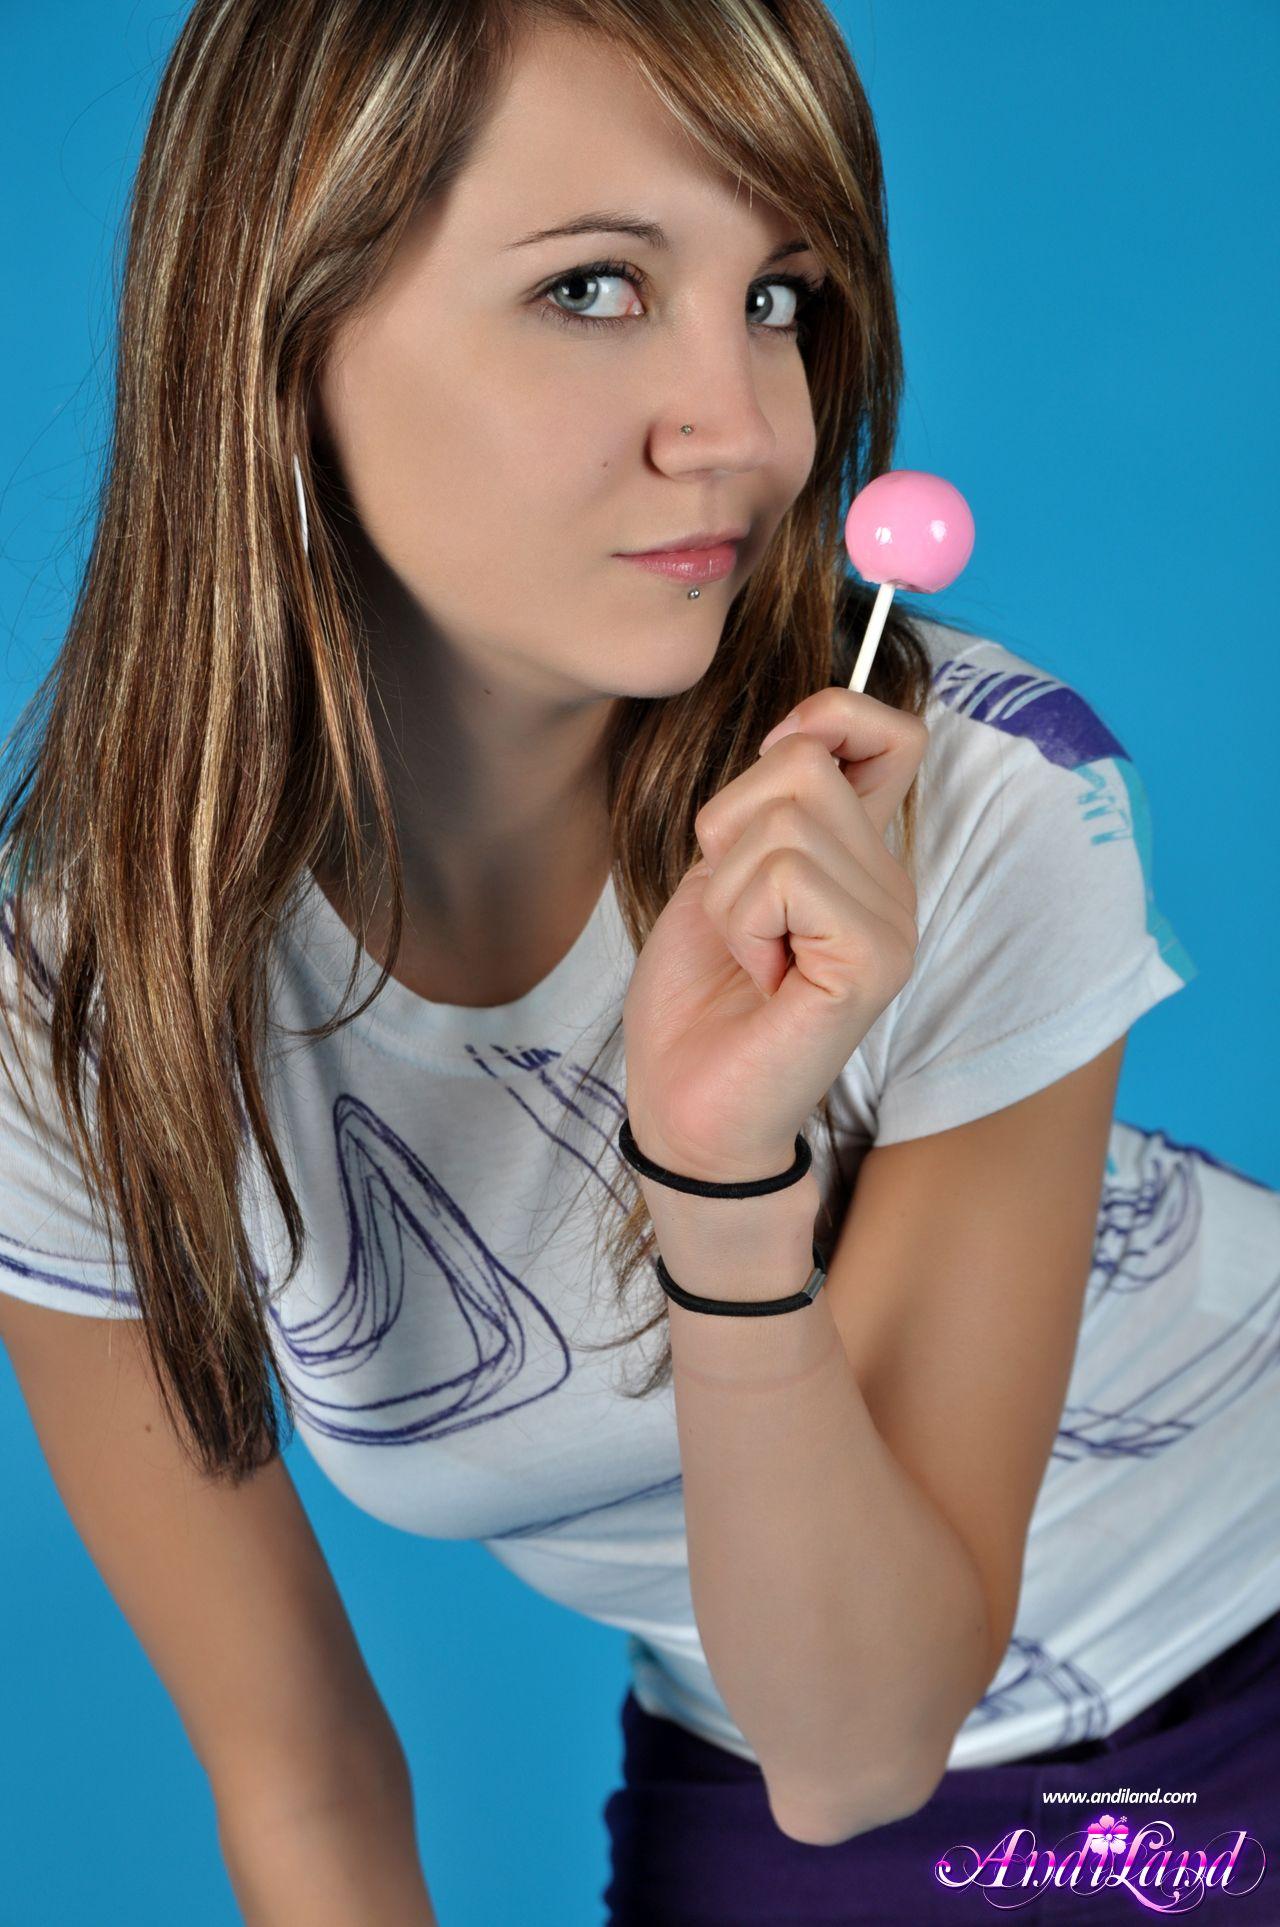 Photos of Andi Land sucking on a lollipop